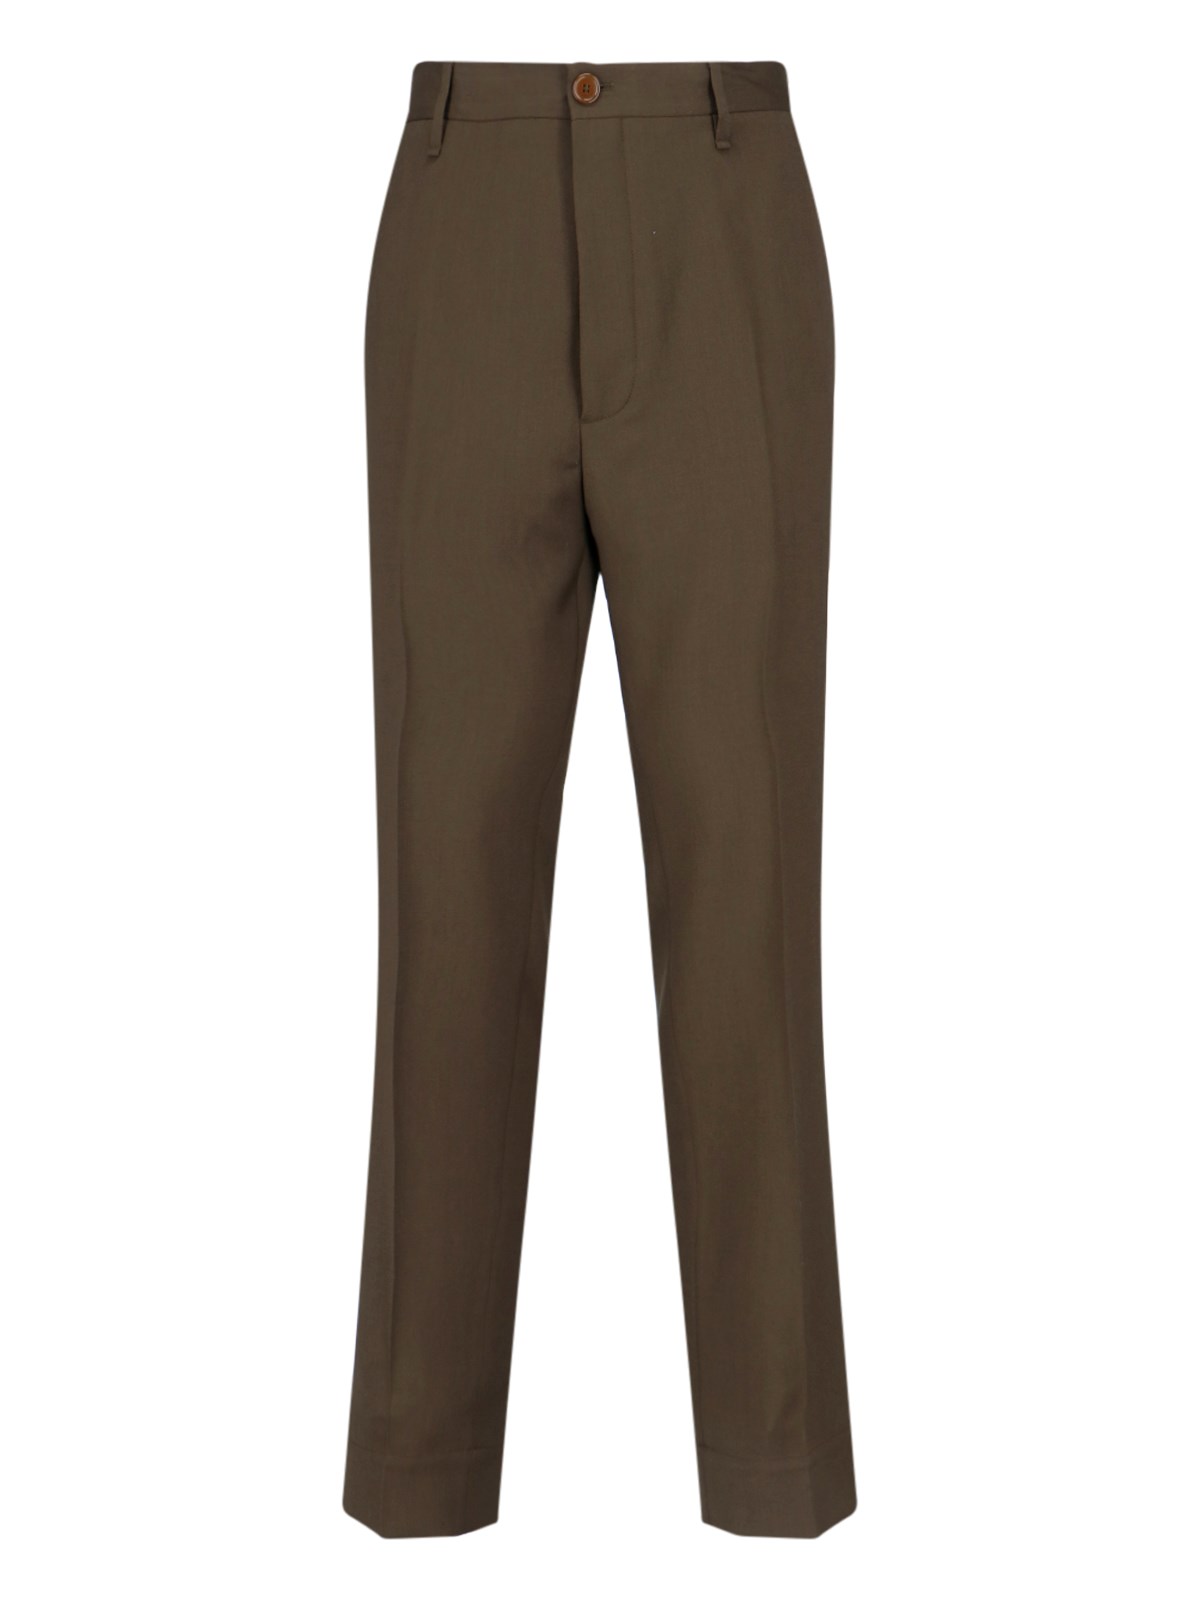 VIVIENNE WESTWOOD 'CRUISE' TROUSERS